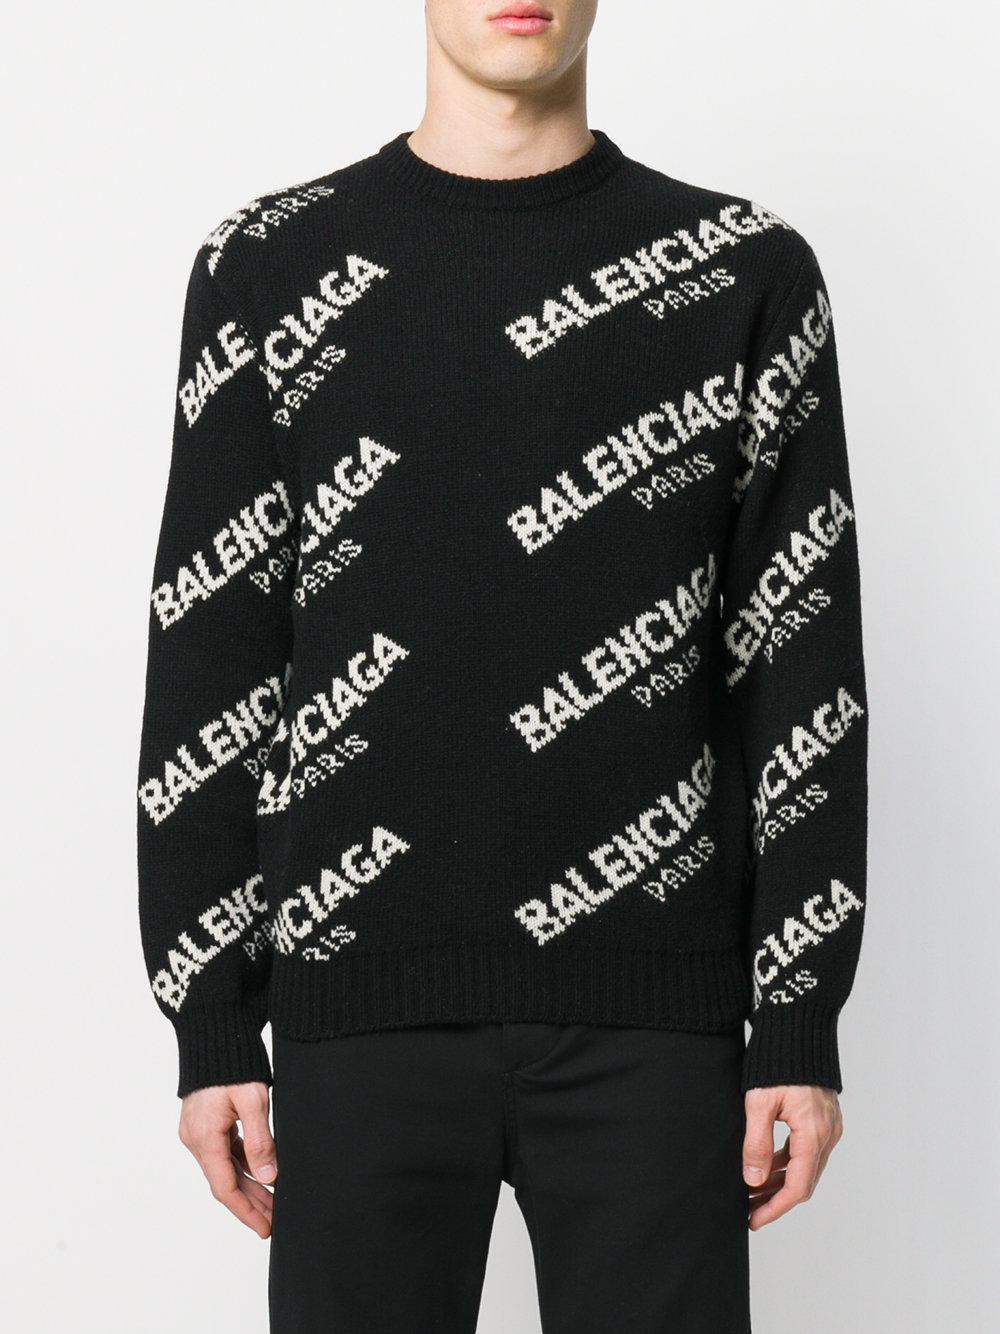 Balenciaga All Over Sweater in Black for Men | Lyst